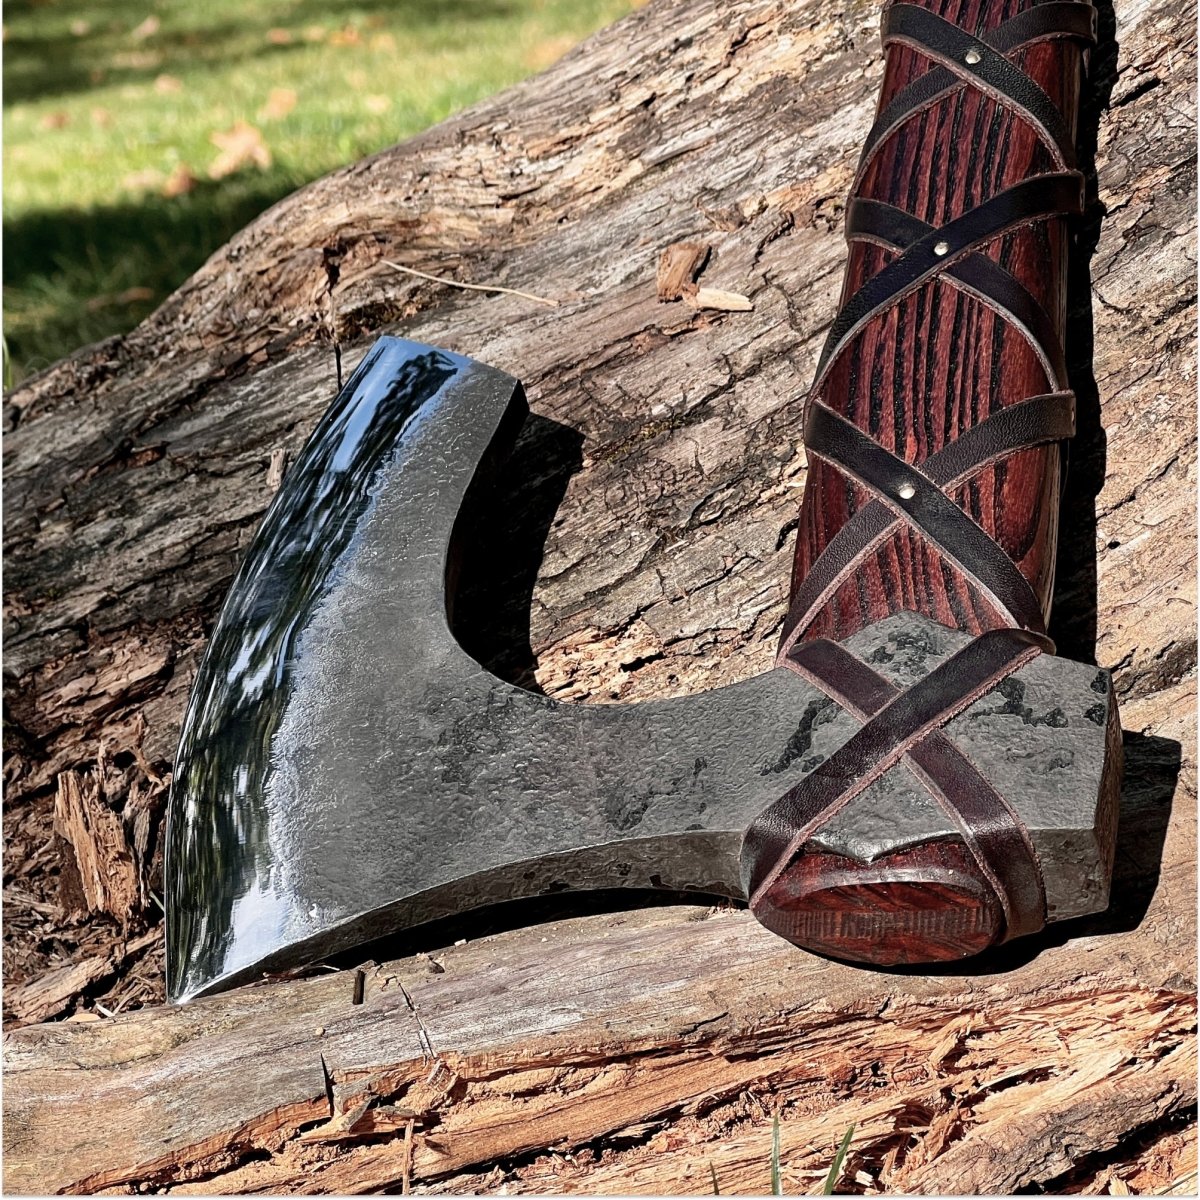 Viking long axe "Ragnar Lodbrok" with carving handle and leather wrap(Functional version) from AncientSmithy